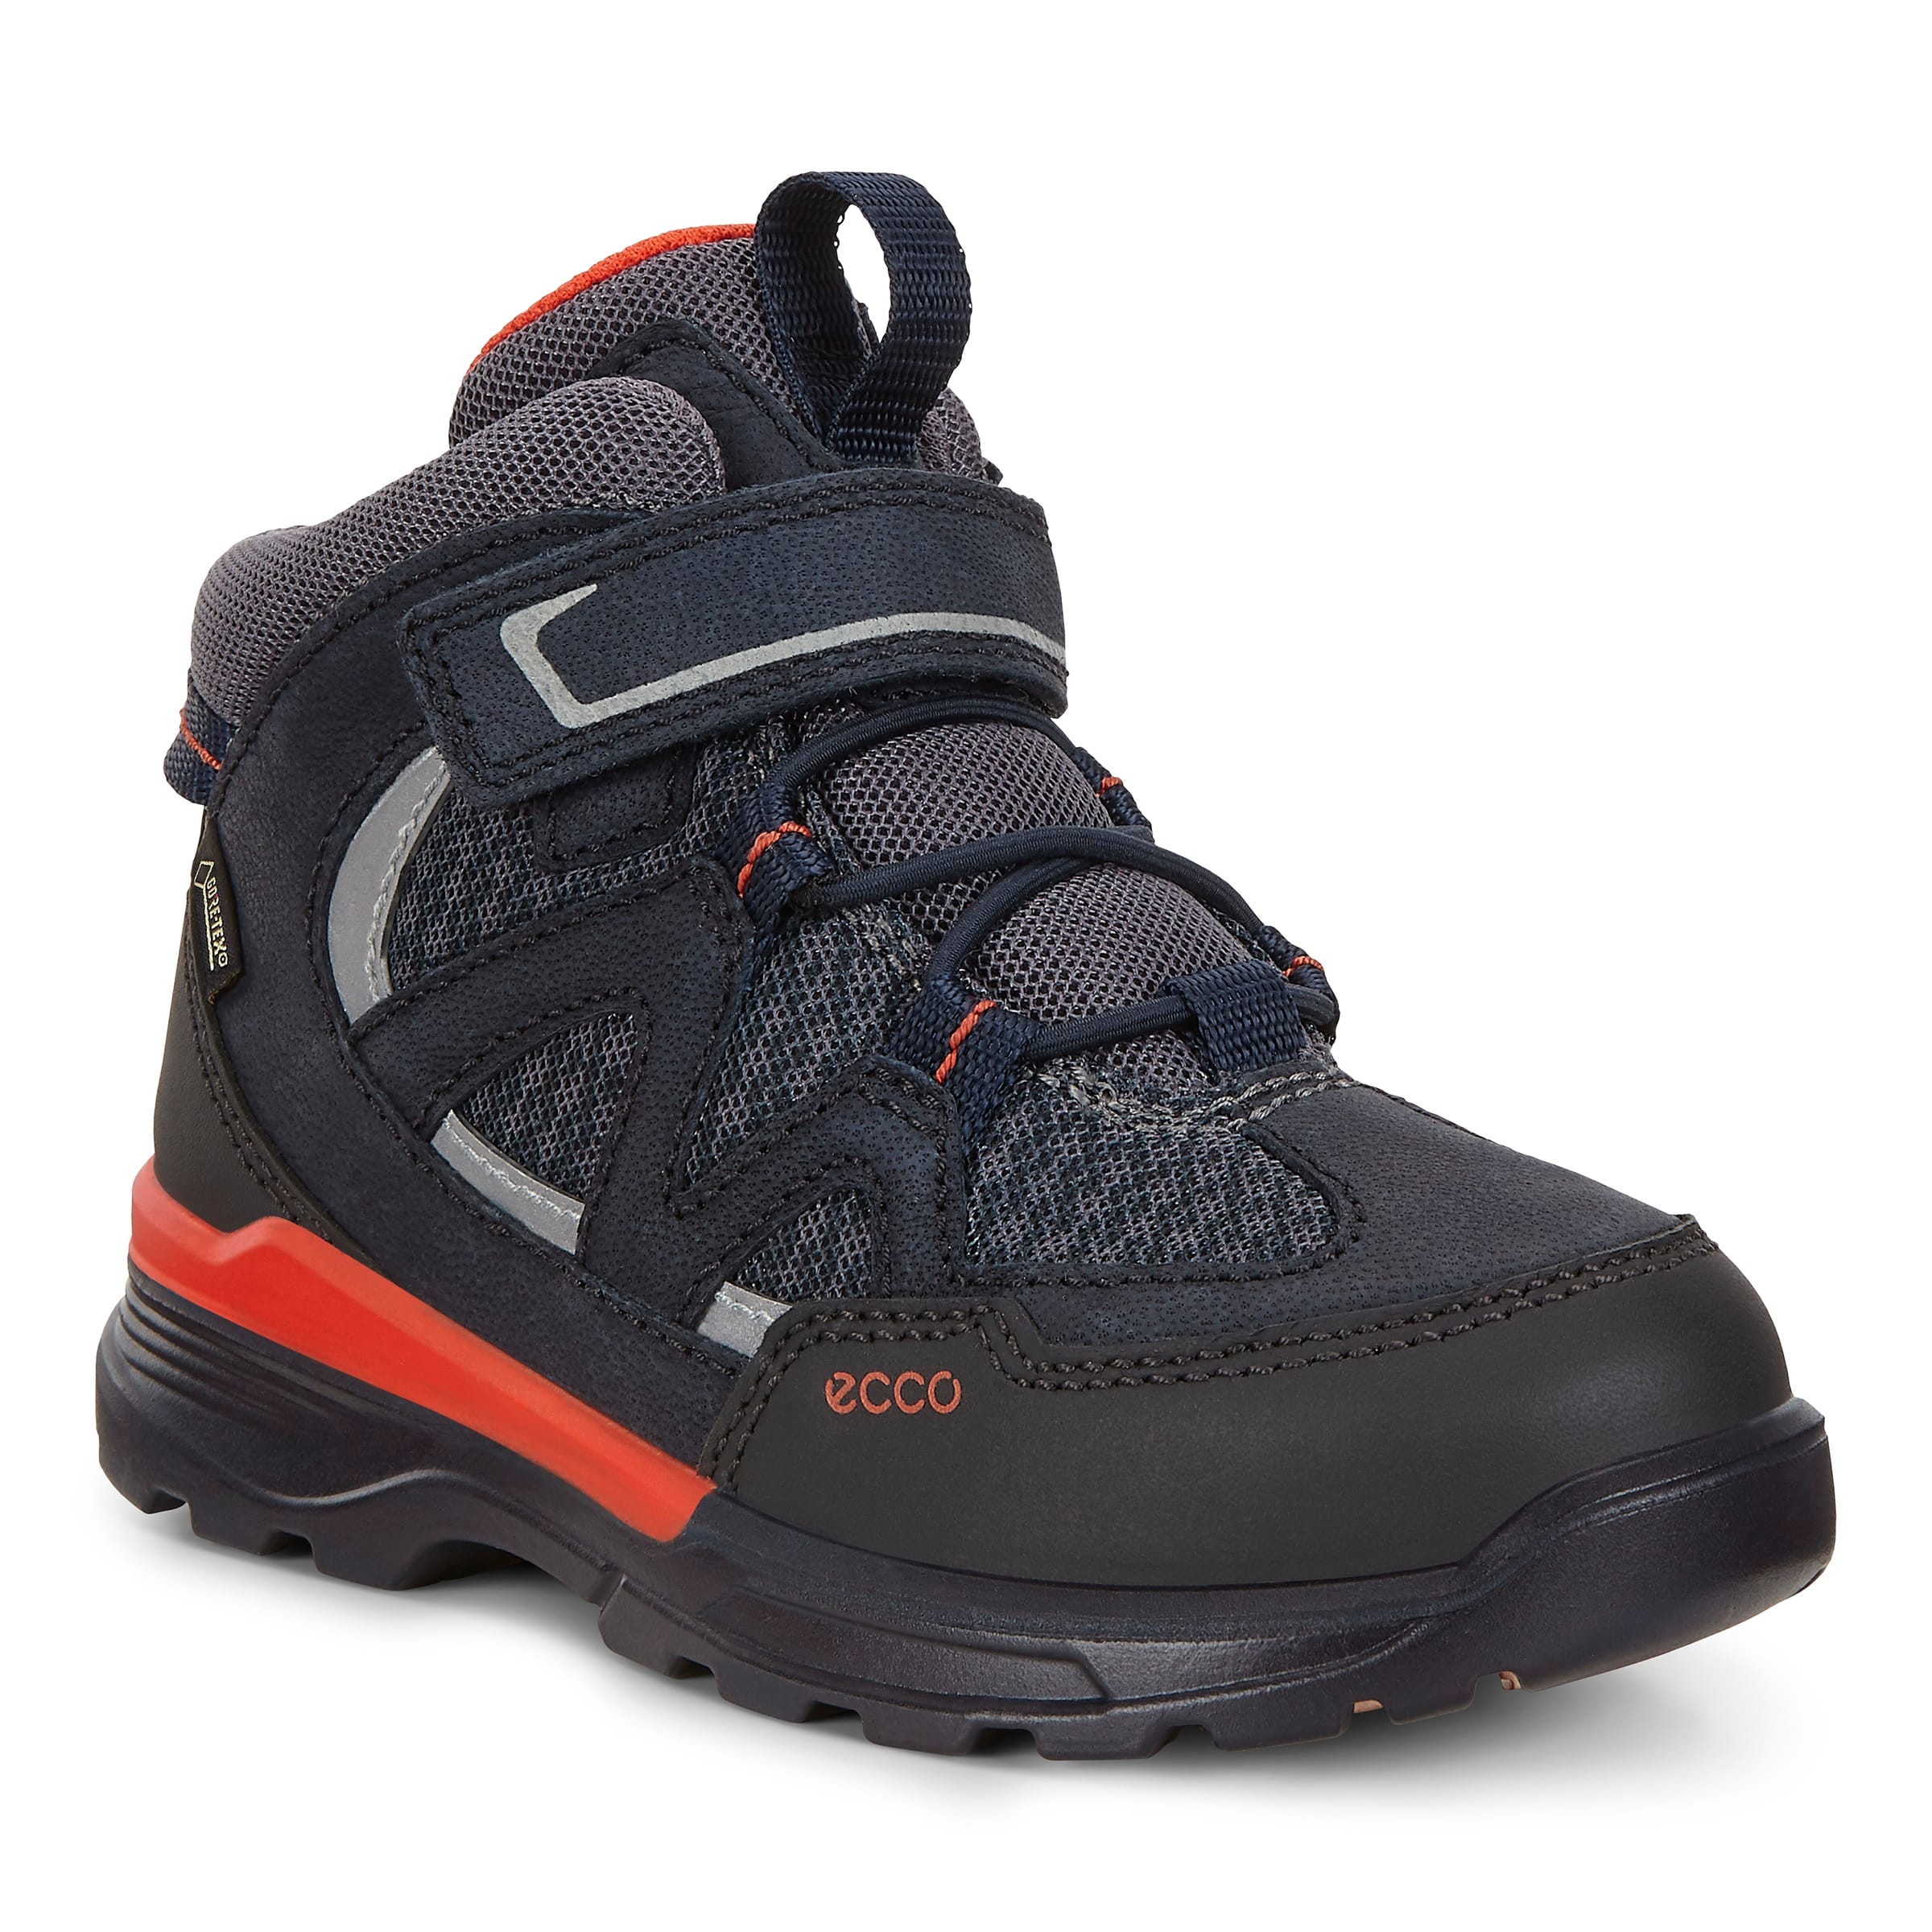 Buy Ecco Urban Hiker from Outnorth